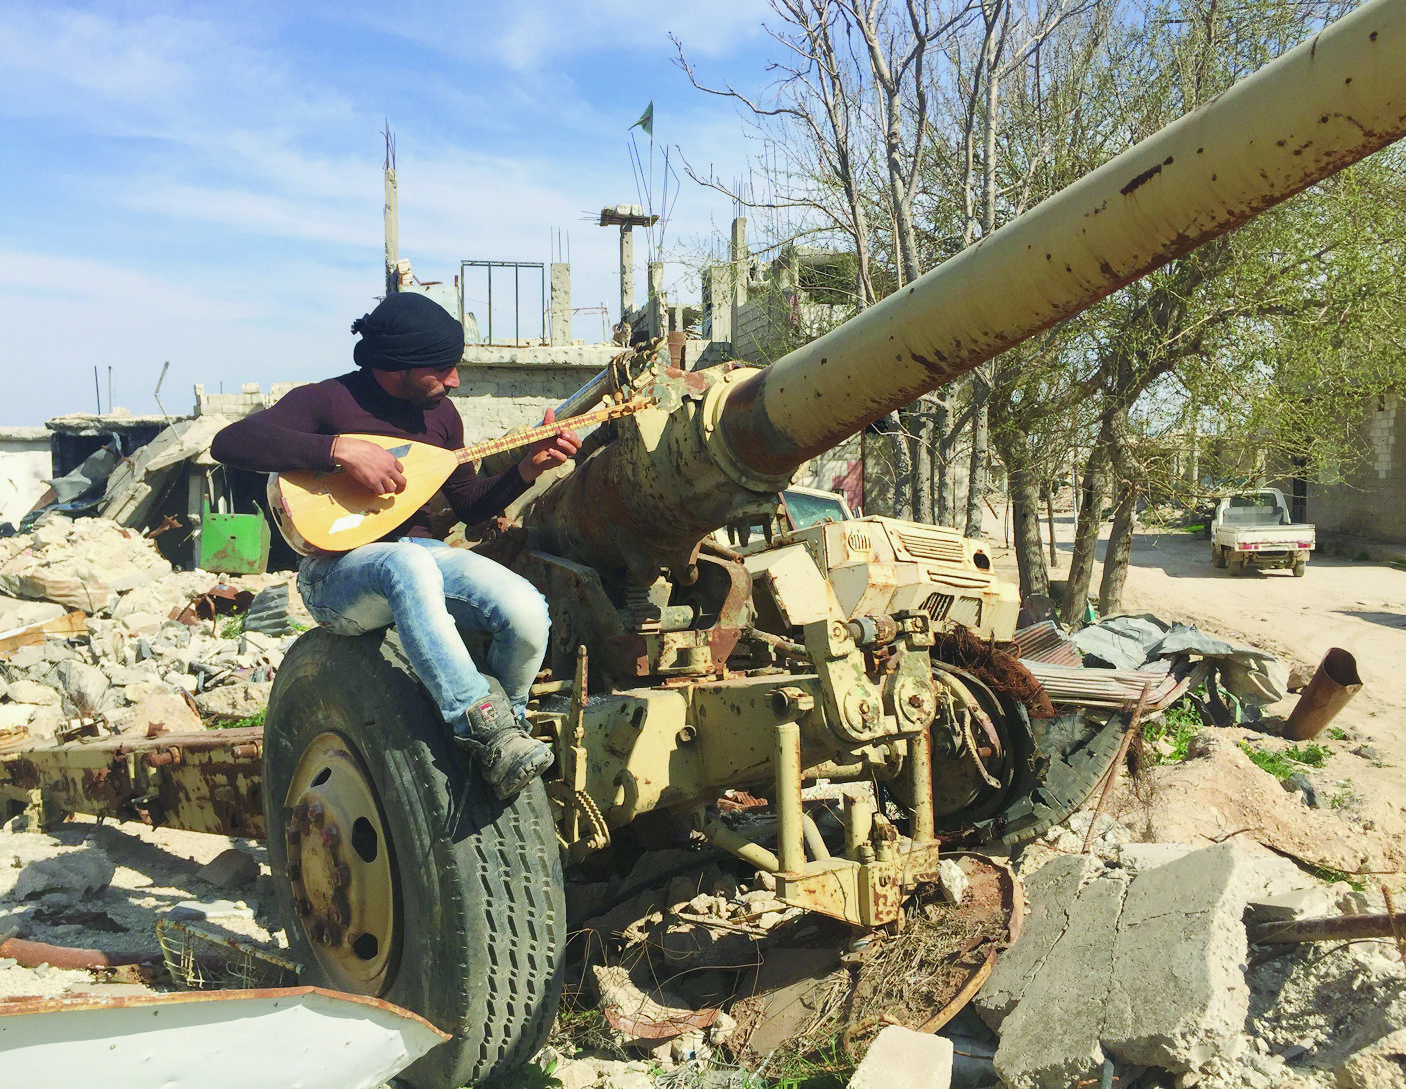 epa05875799 A photograph made available on 28 March 2017 showing a man playing a musical instrument sitting on destroyed military hadware amongst the rubble in Kobani, the Kurdish region in the Aleppo Governorate in northern Syria, 26 March 2017. US and coalition military forces continued to attack the Islamic State (IS) of Iraq and Syria, conducting 30 strikes consisting of 72 engagements against ISIS targets 27 March 2017, Combined Joint Task Force Operation Inherent Resolve officials reported on 28 March 2017.  EPA/STRINGER SYRIA CONFLICT